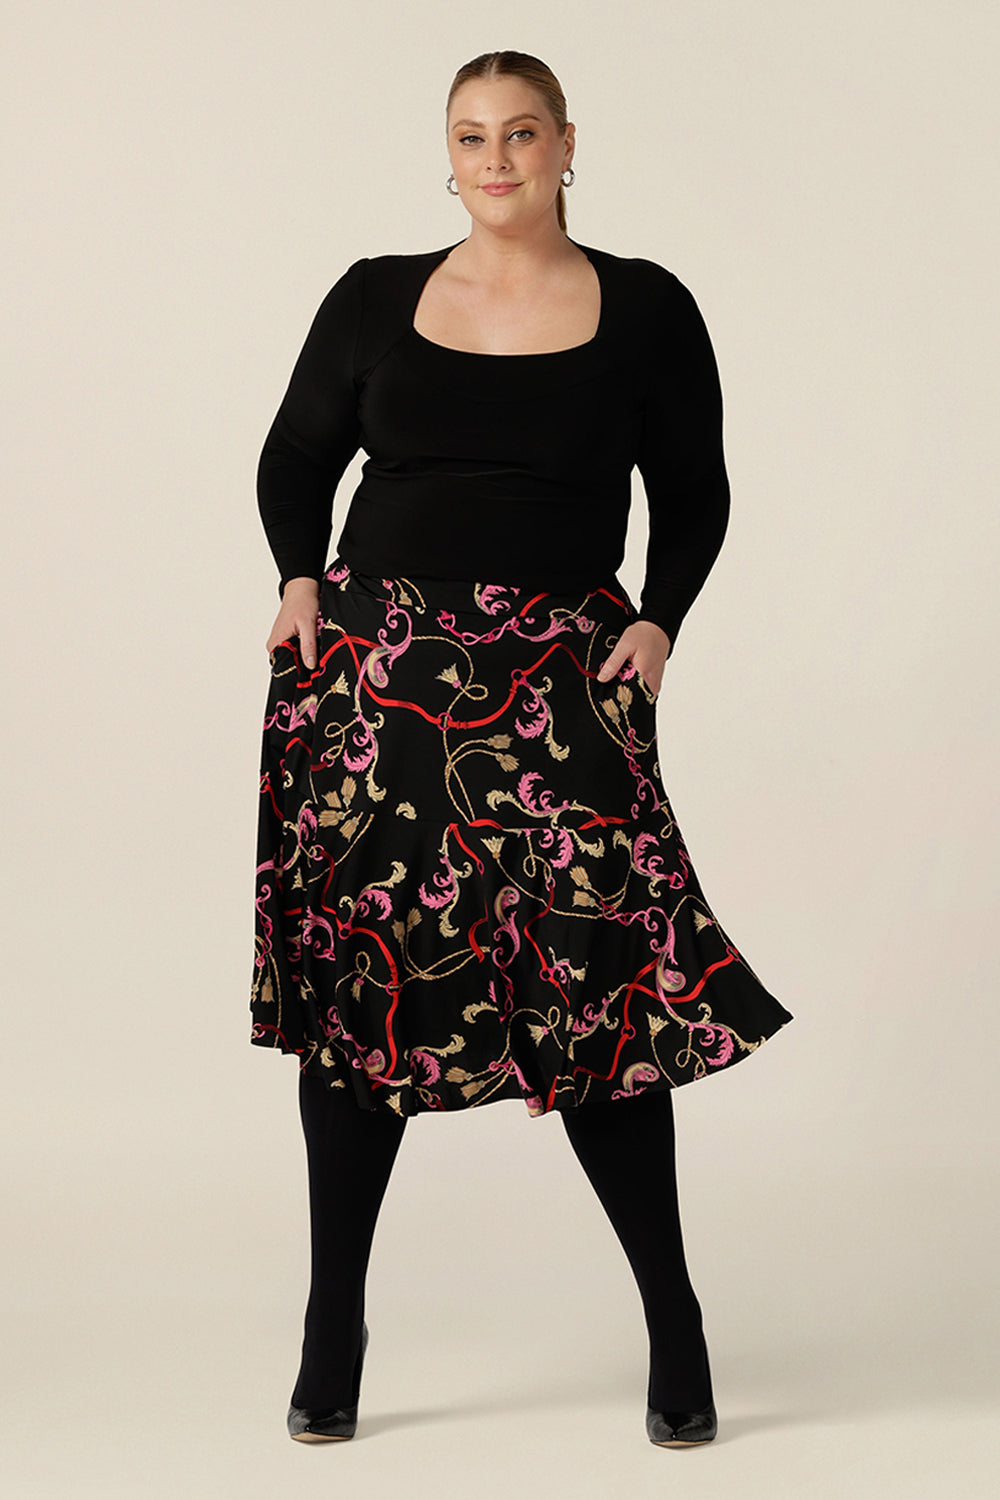 A curvy, size 18 woman wears a good skirt for plus size workwear. The Berit Skirt in Tassel is a pull-on knee length skirt with pockets and ruffle hem, and is worn with a square neck, long sleeve black top.  Both women's plus size skirt and top are made in Australia by Australian fashion brand, L&F.